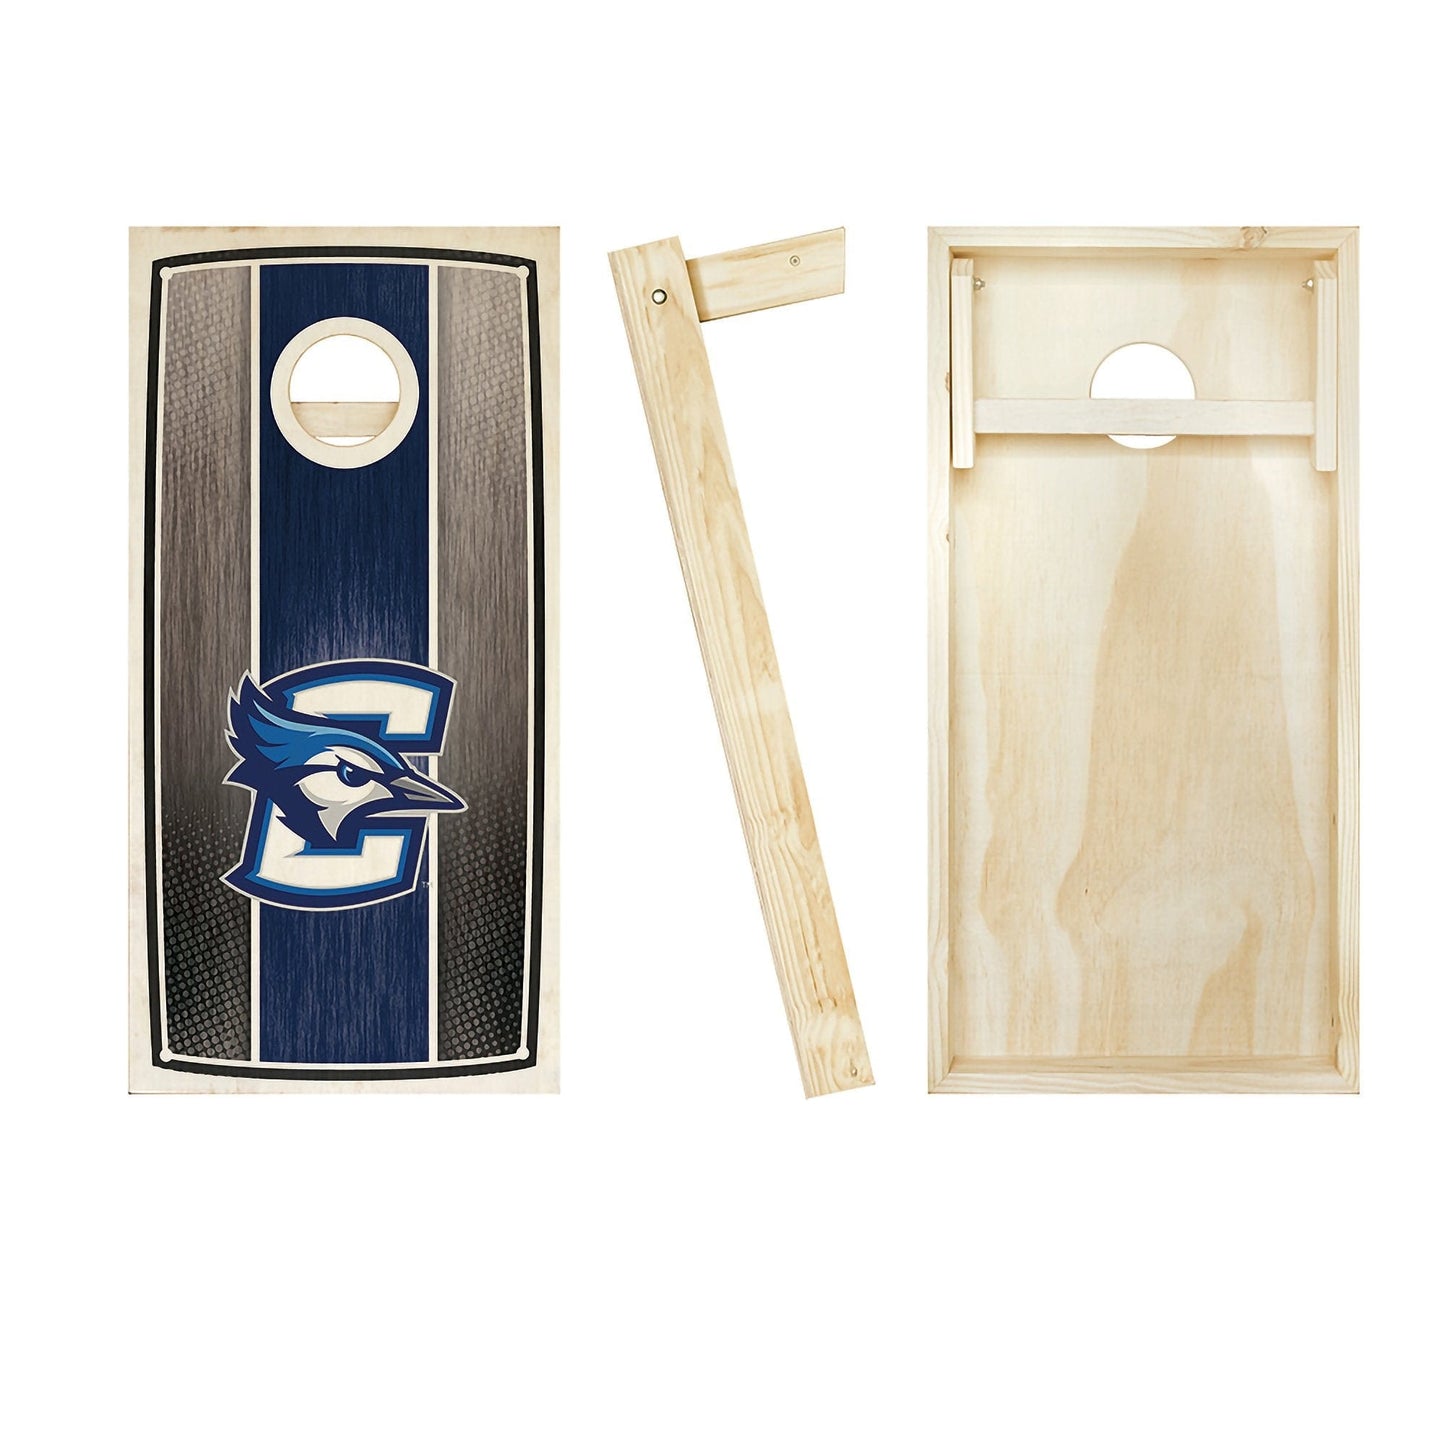 Creighton Stained Striped board entire set